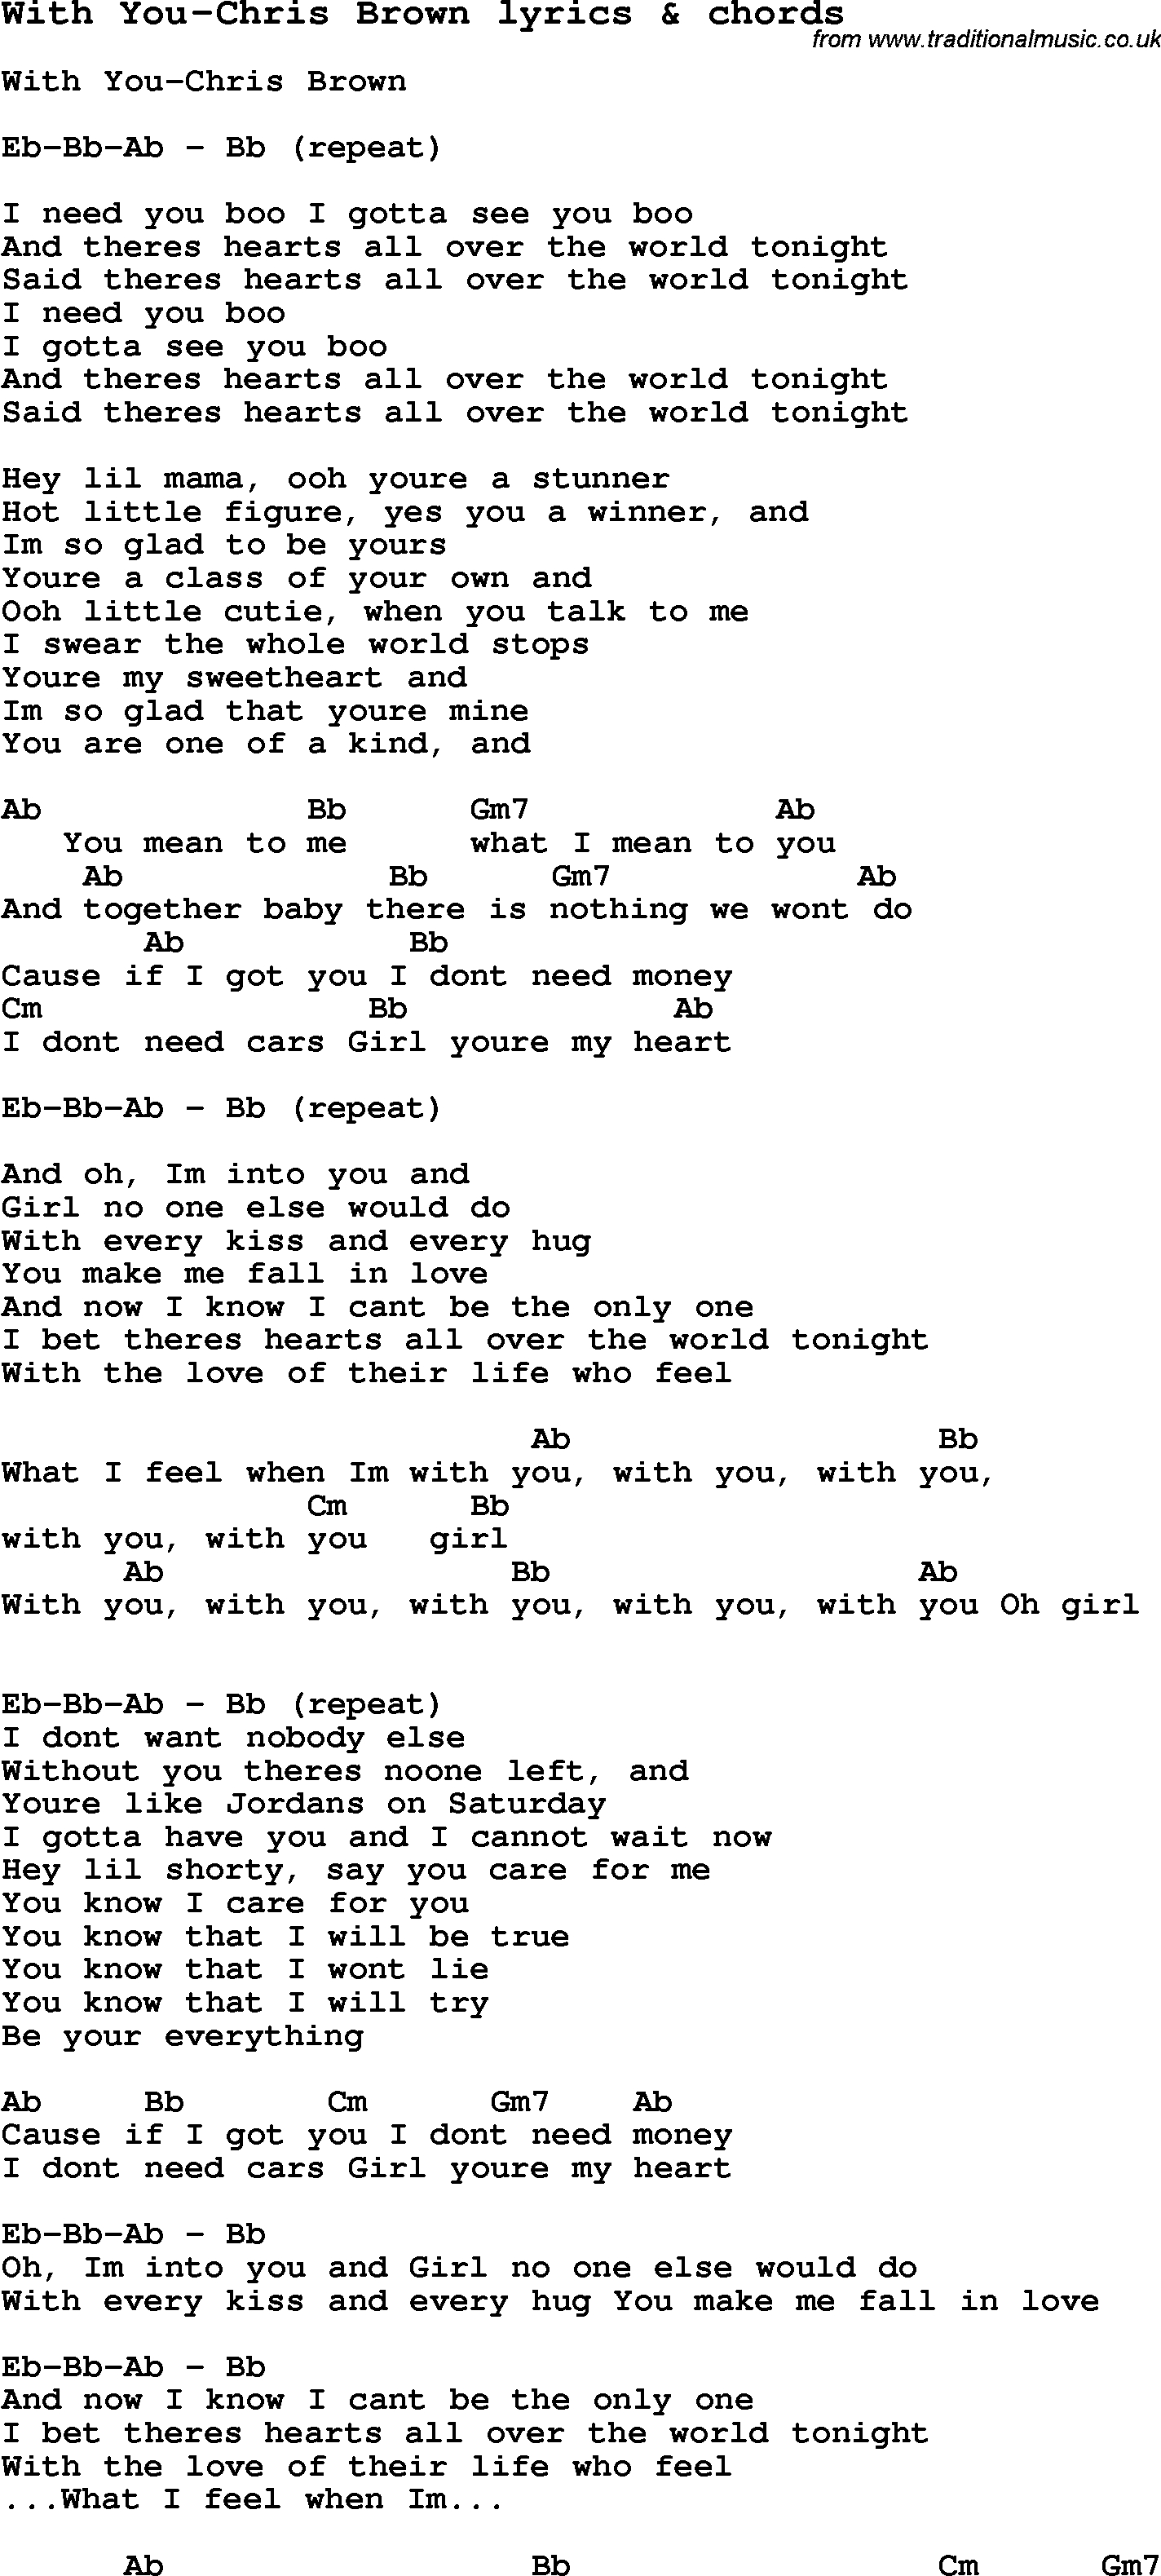 Into You Chords Love Song Lyrics Forwith You Chris Brown With Chords